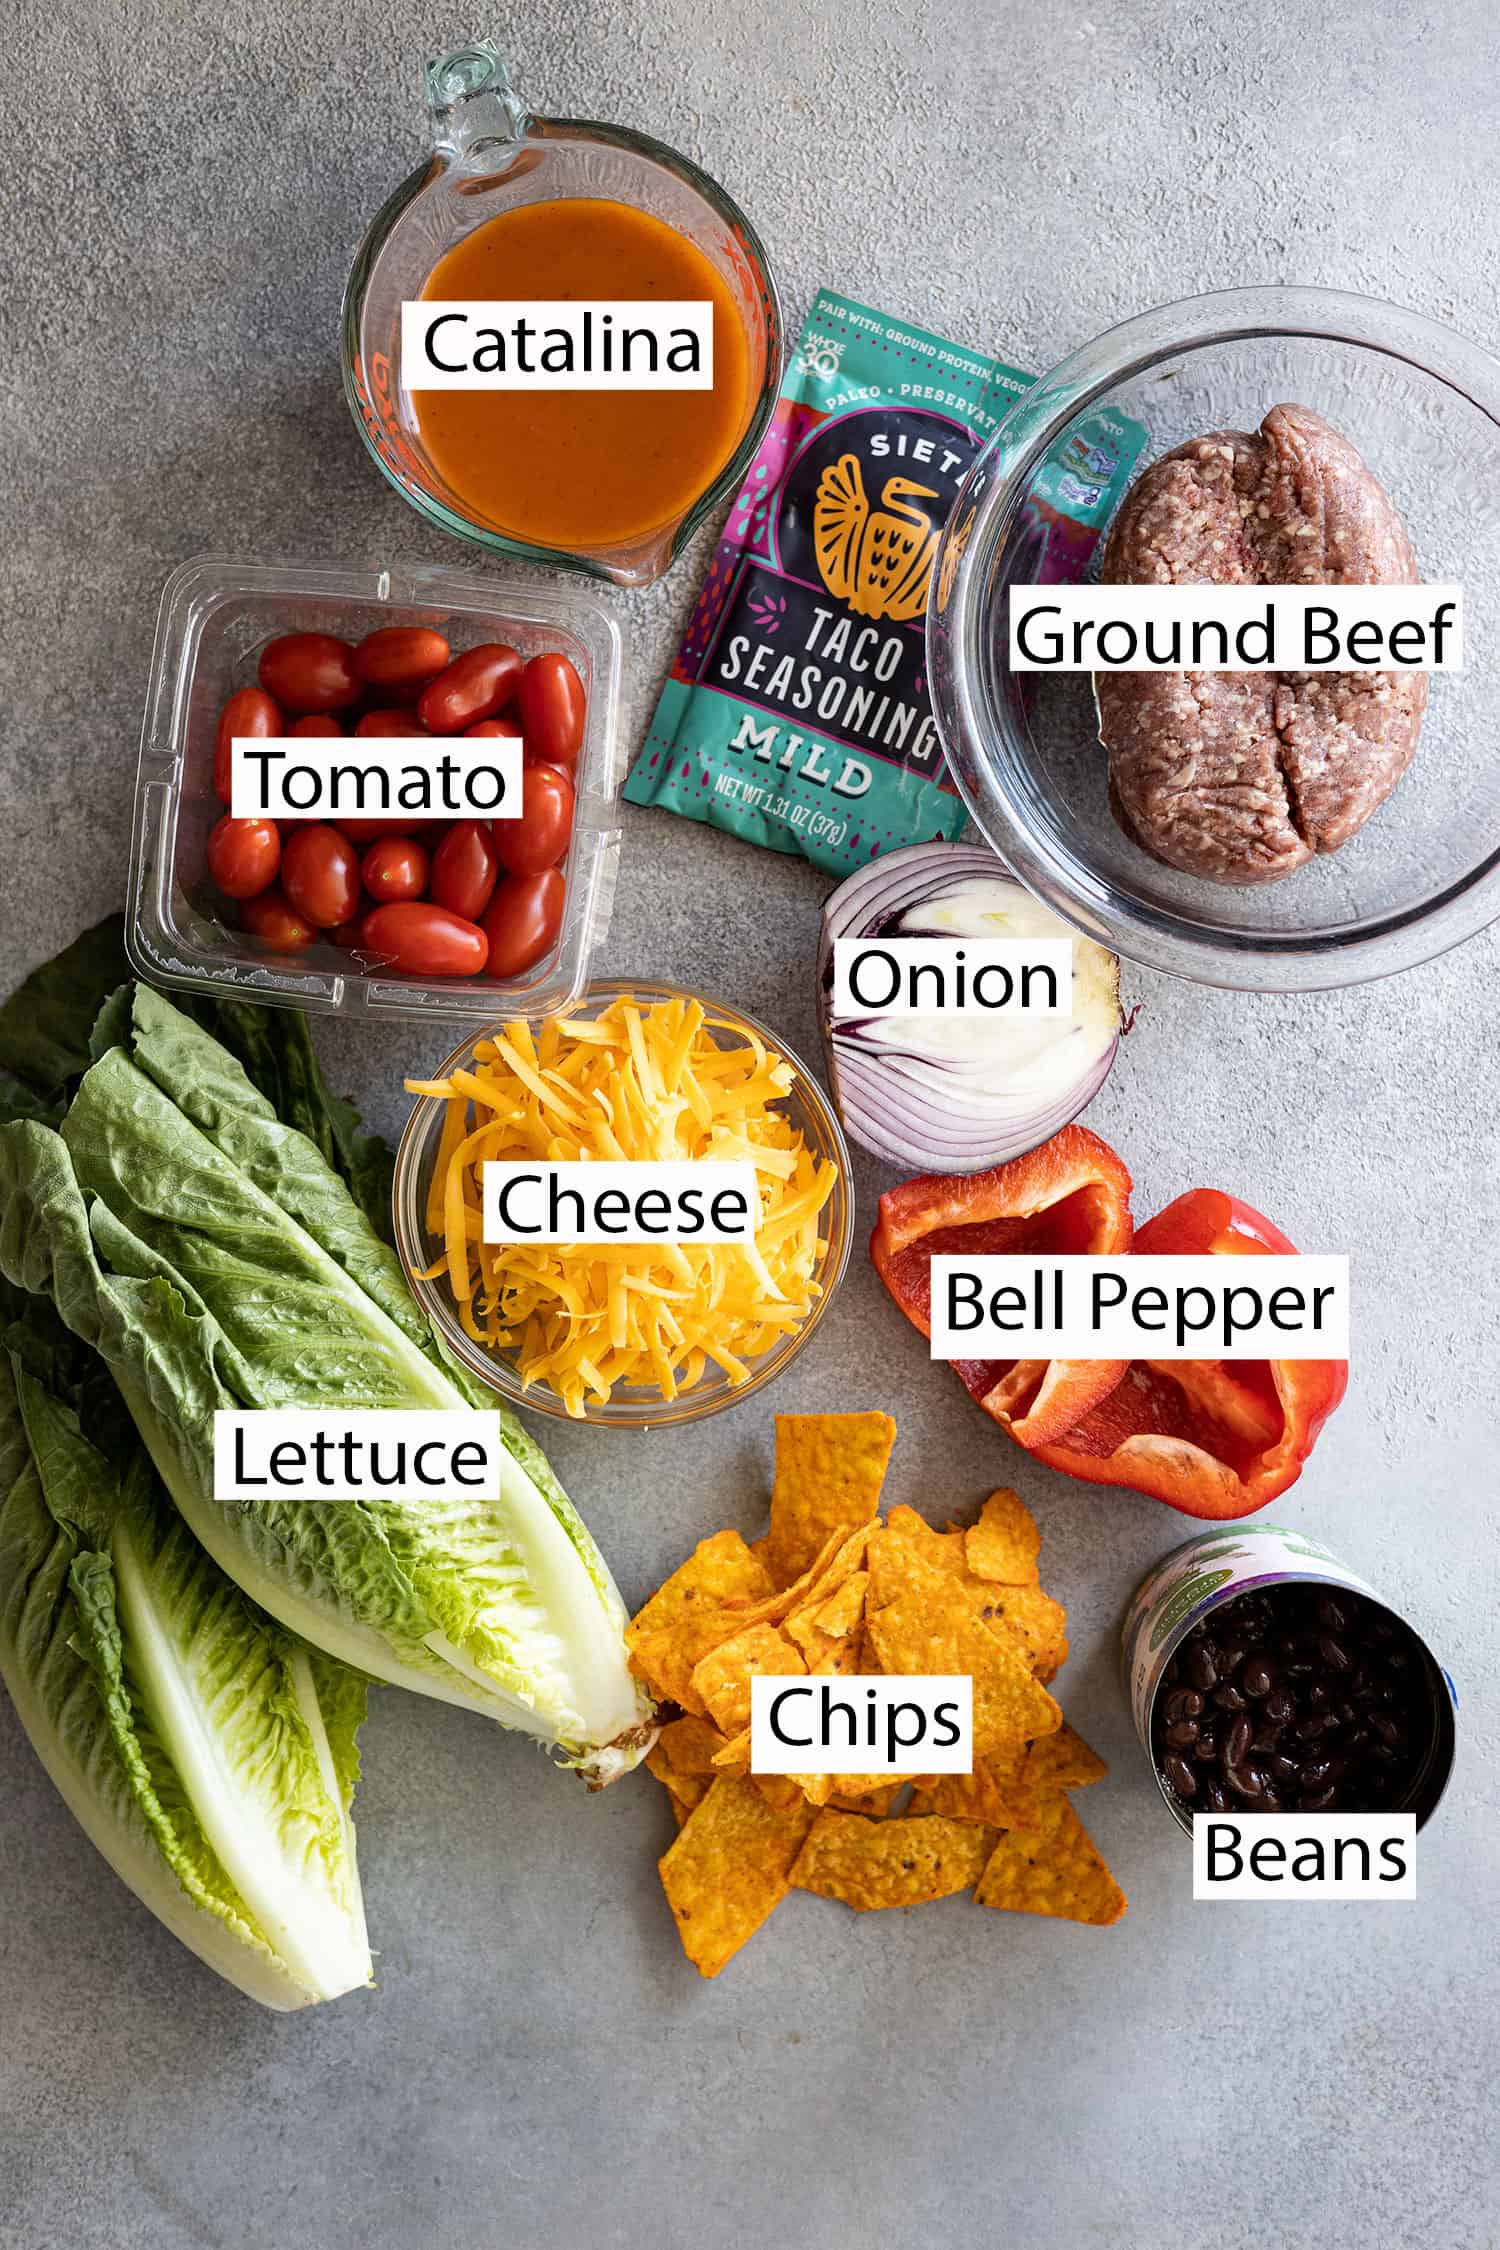 Ingredients: ground beef, taco seasoning, catalina dressing, tomato, onion, cheese, bell pepper, lettuce, beans, chips. 